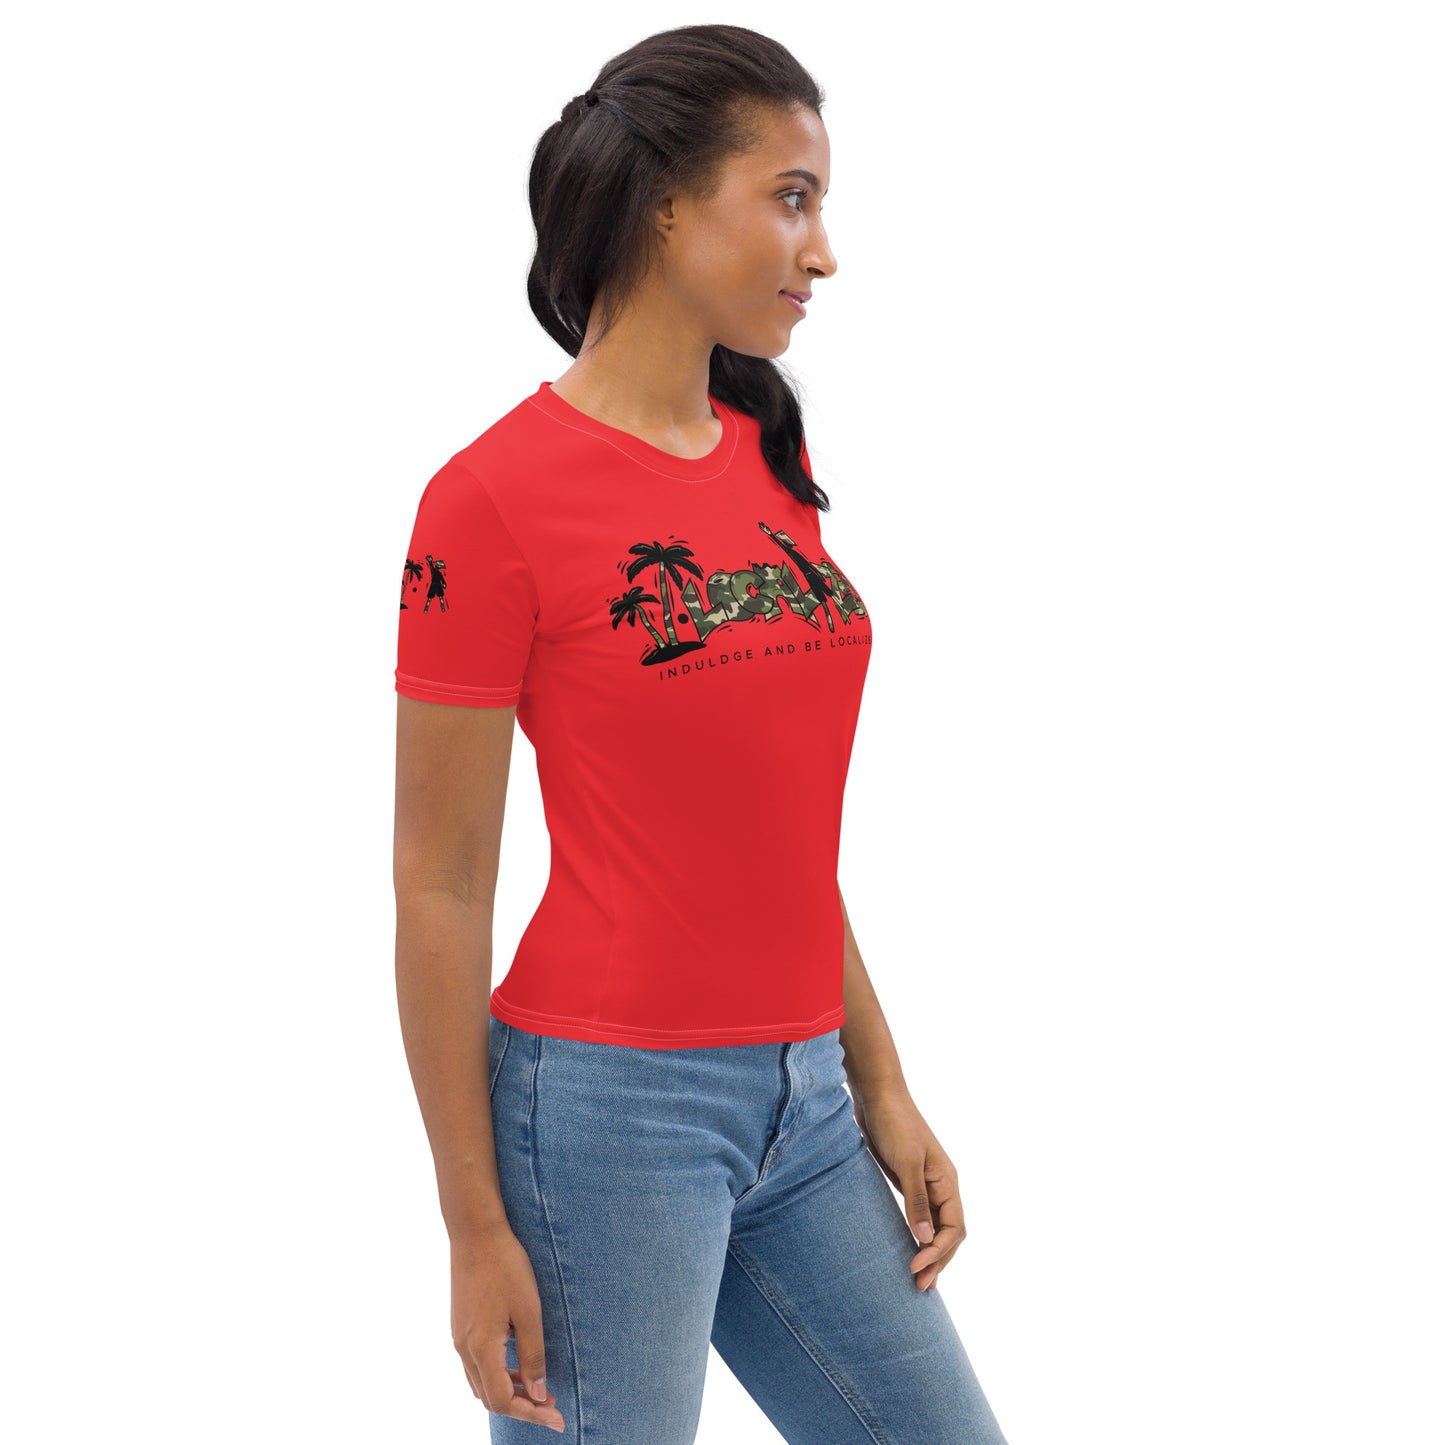 Red V.Localized (Camo) Women’s Dry-Fit T-Shirt